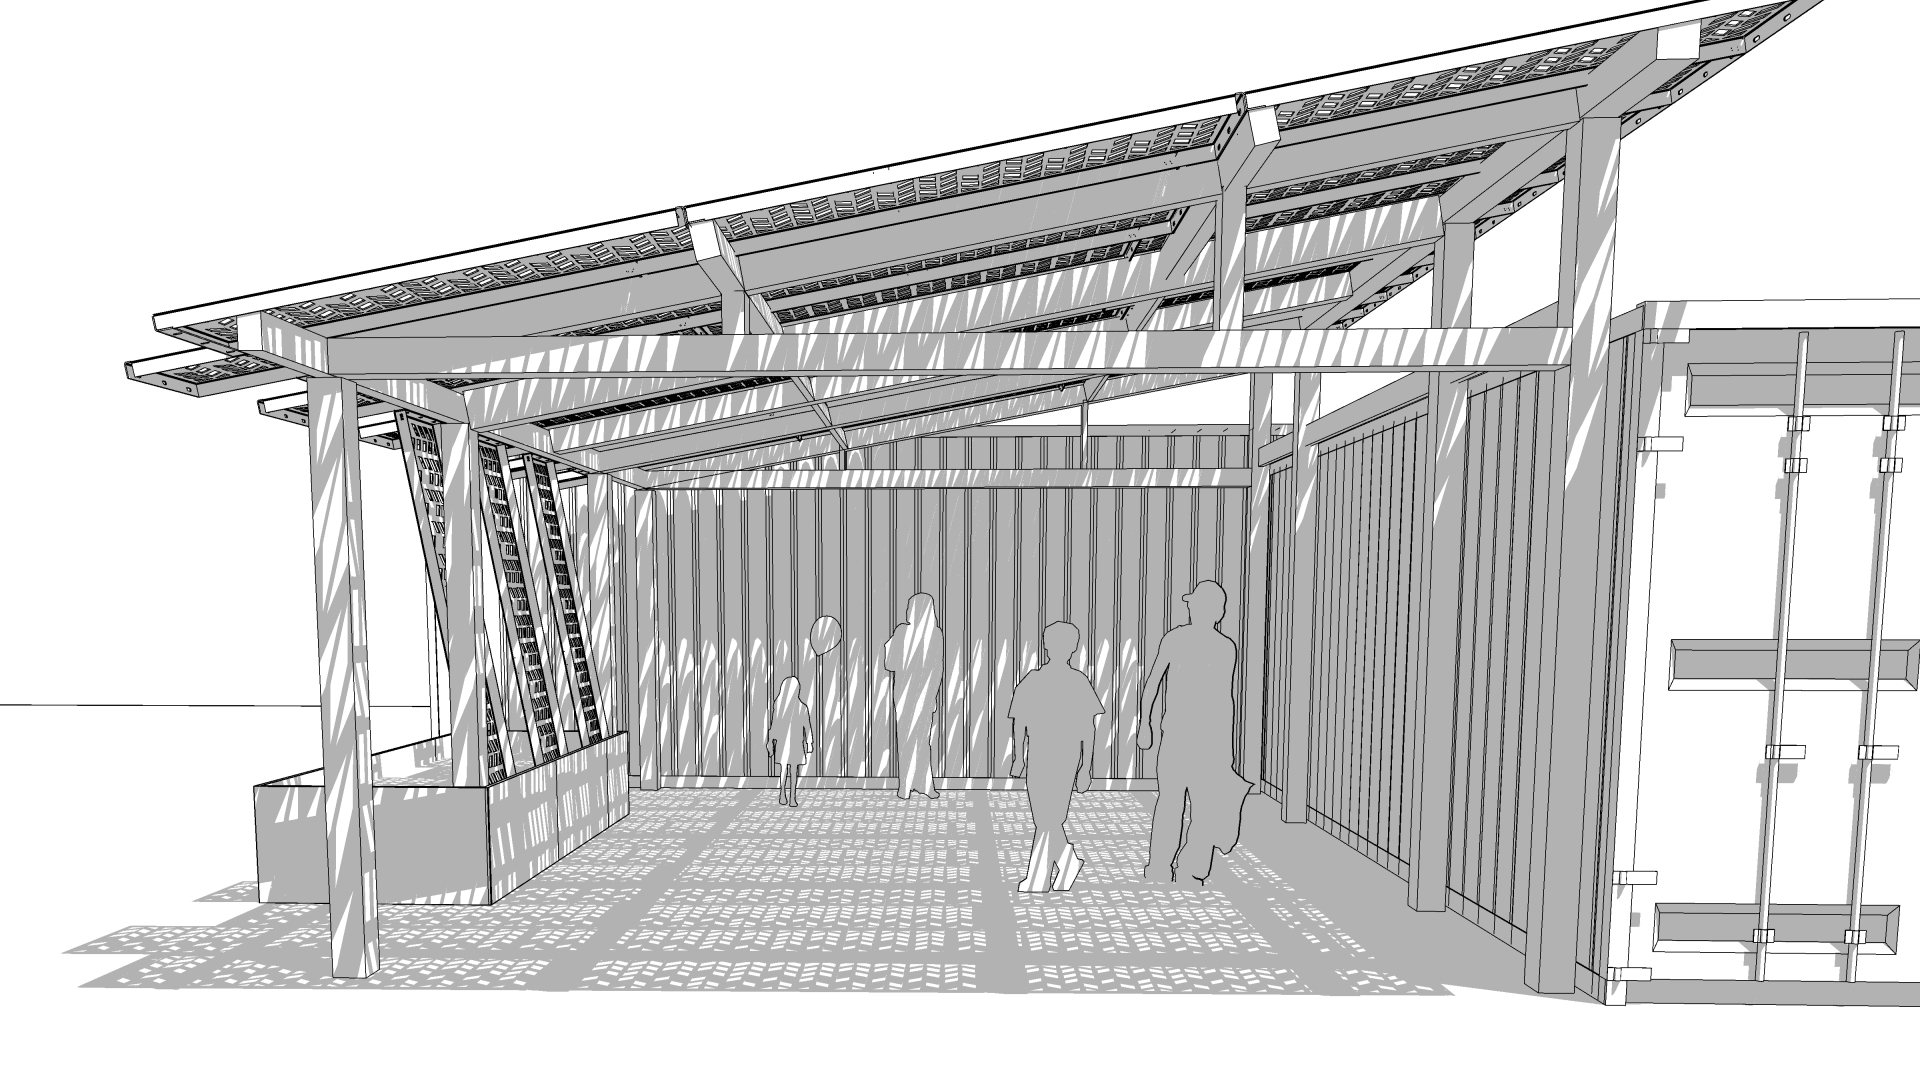 Rendering of the open entrance to Farm2Market Shade Trellis in Alameda, California.